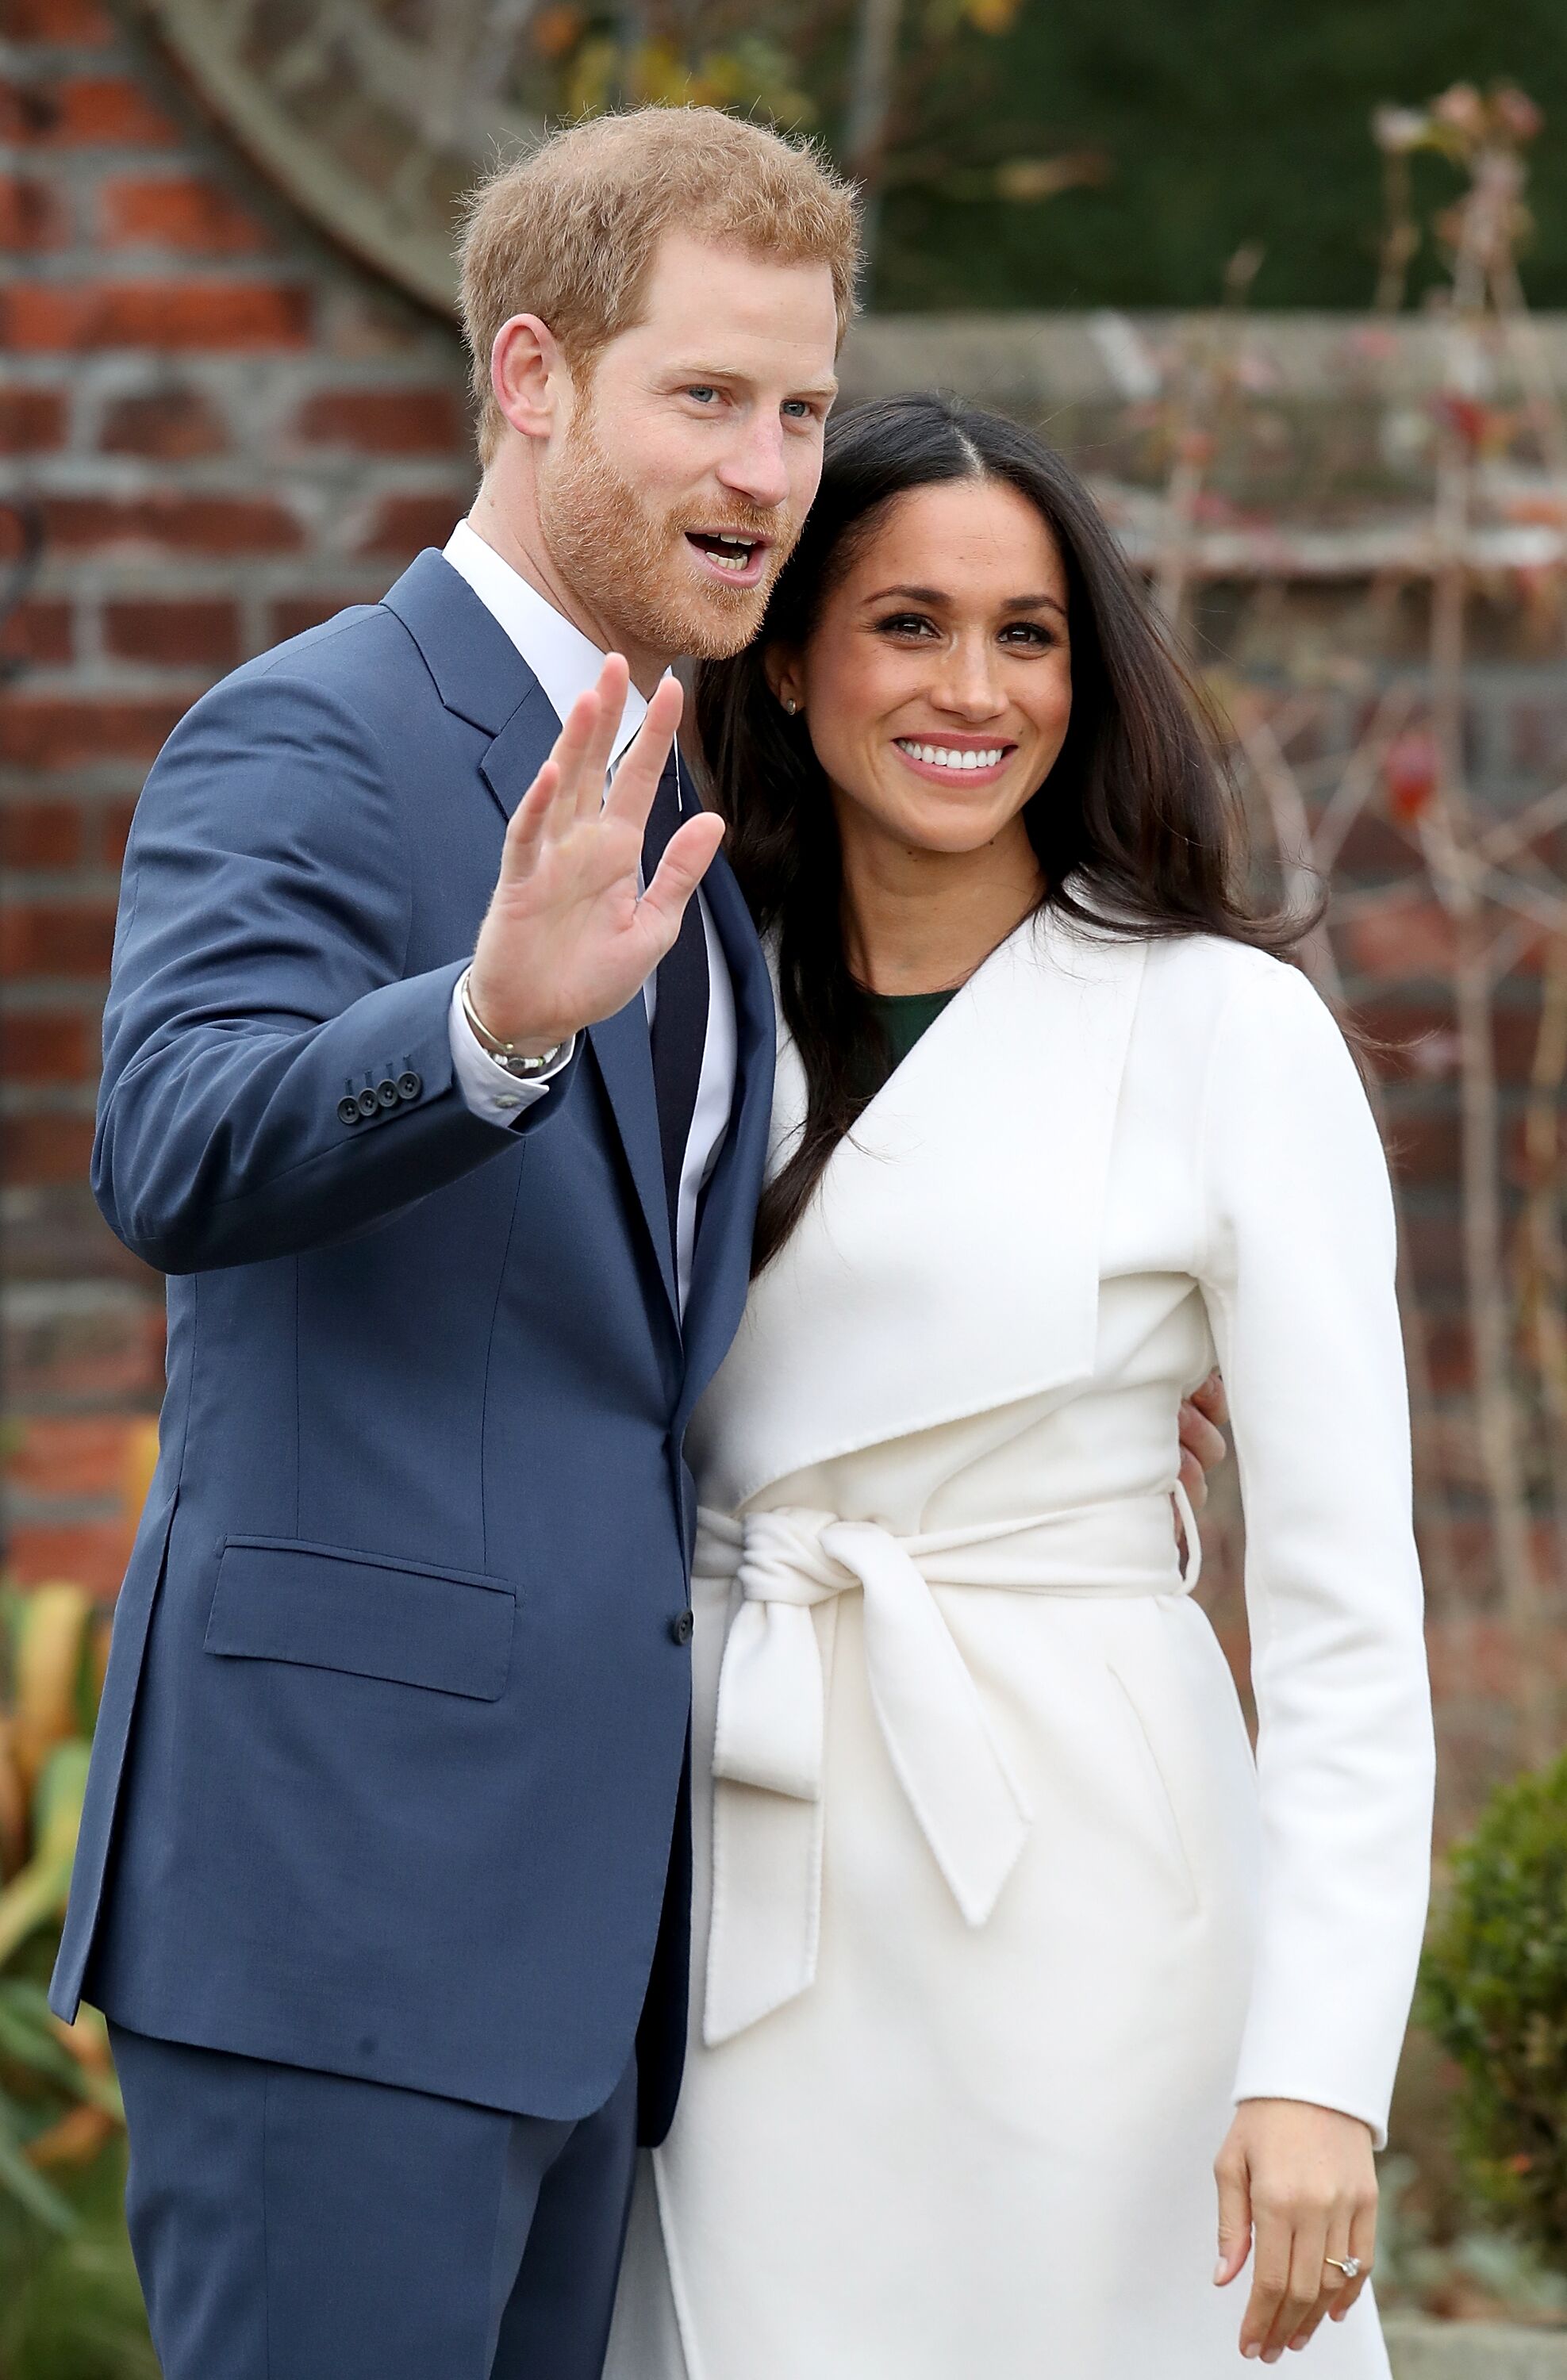 Prince Harry and Meghan Markle during an official photocall to announce their engagement at The Sunken Gardens at Kensington Palace on November 27, 2017 in London, England | Photo: Getty Images